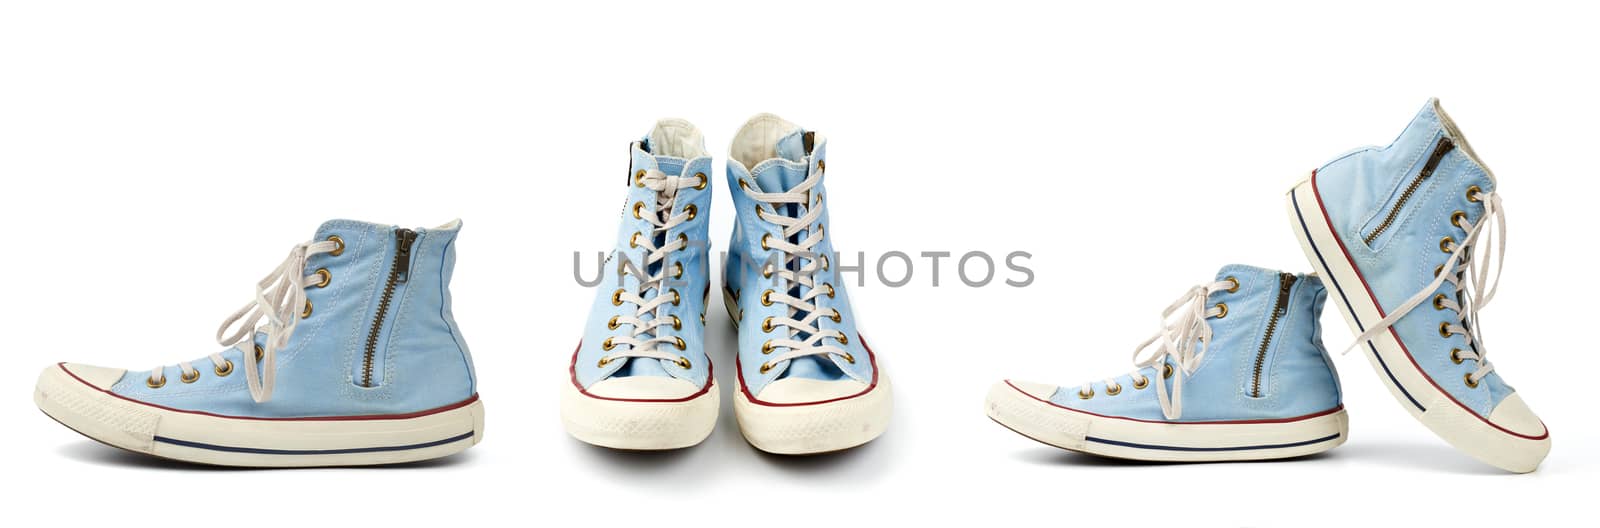 pair of light blue worn textile sneakers with laces and zippers isolated on a white background, side view of shoes and front view, set